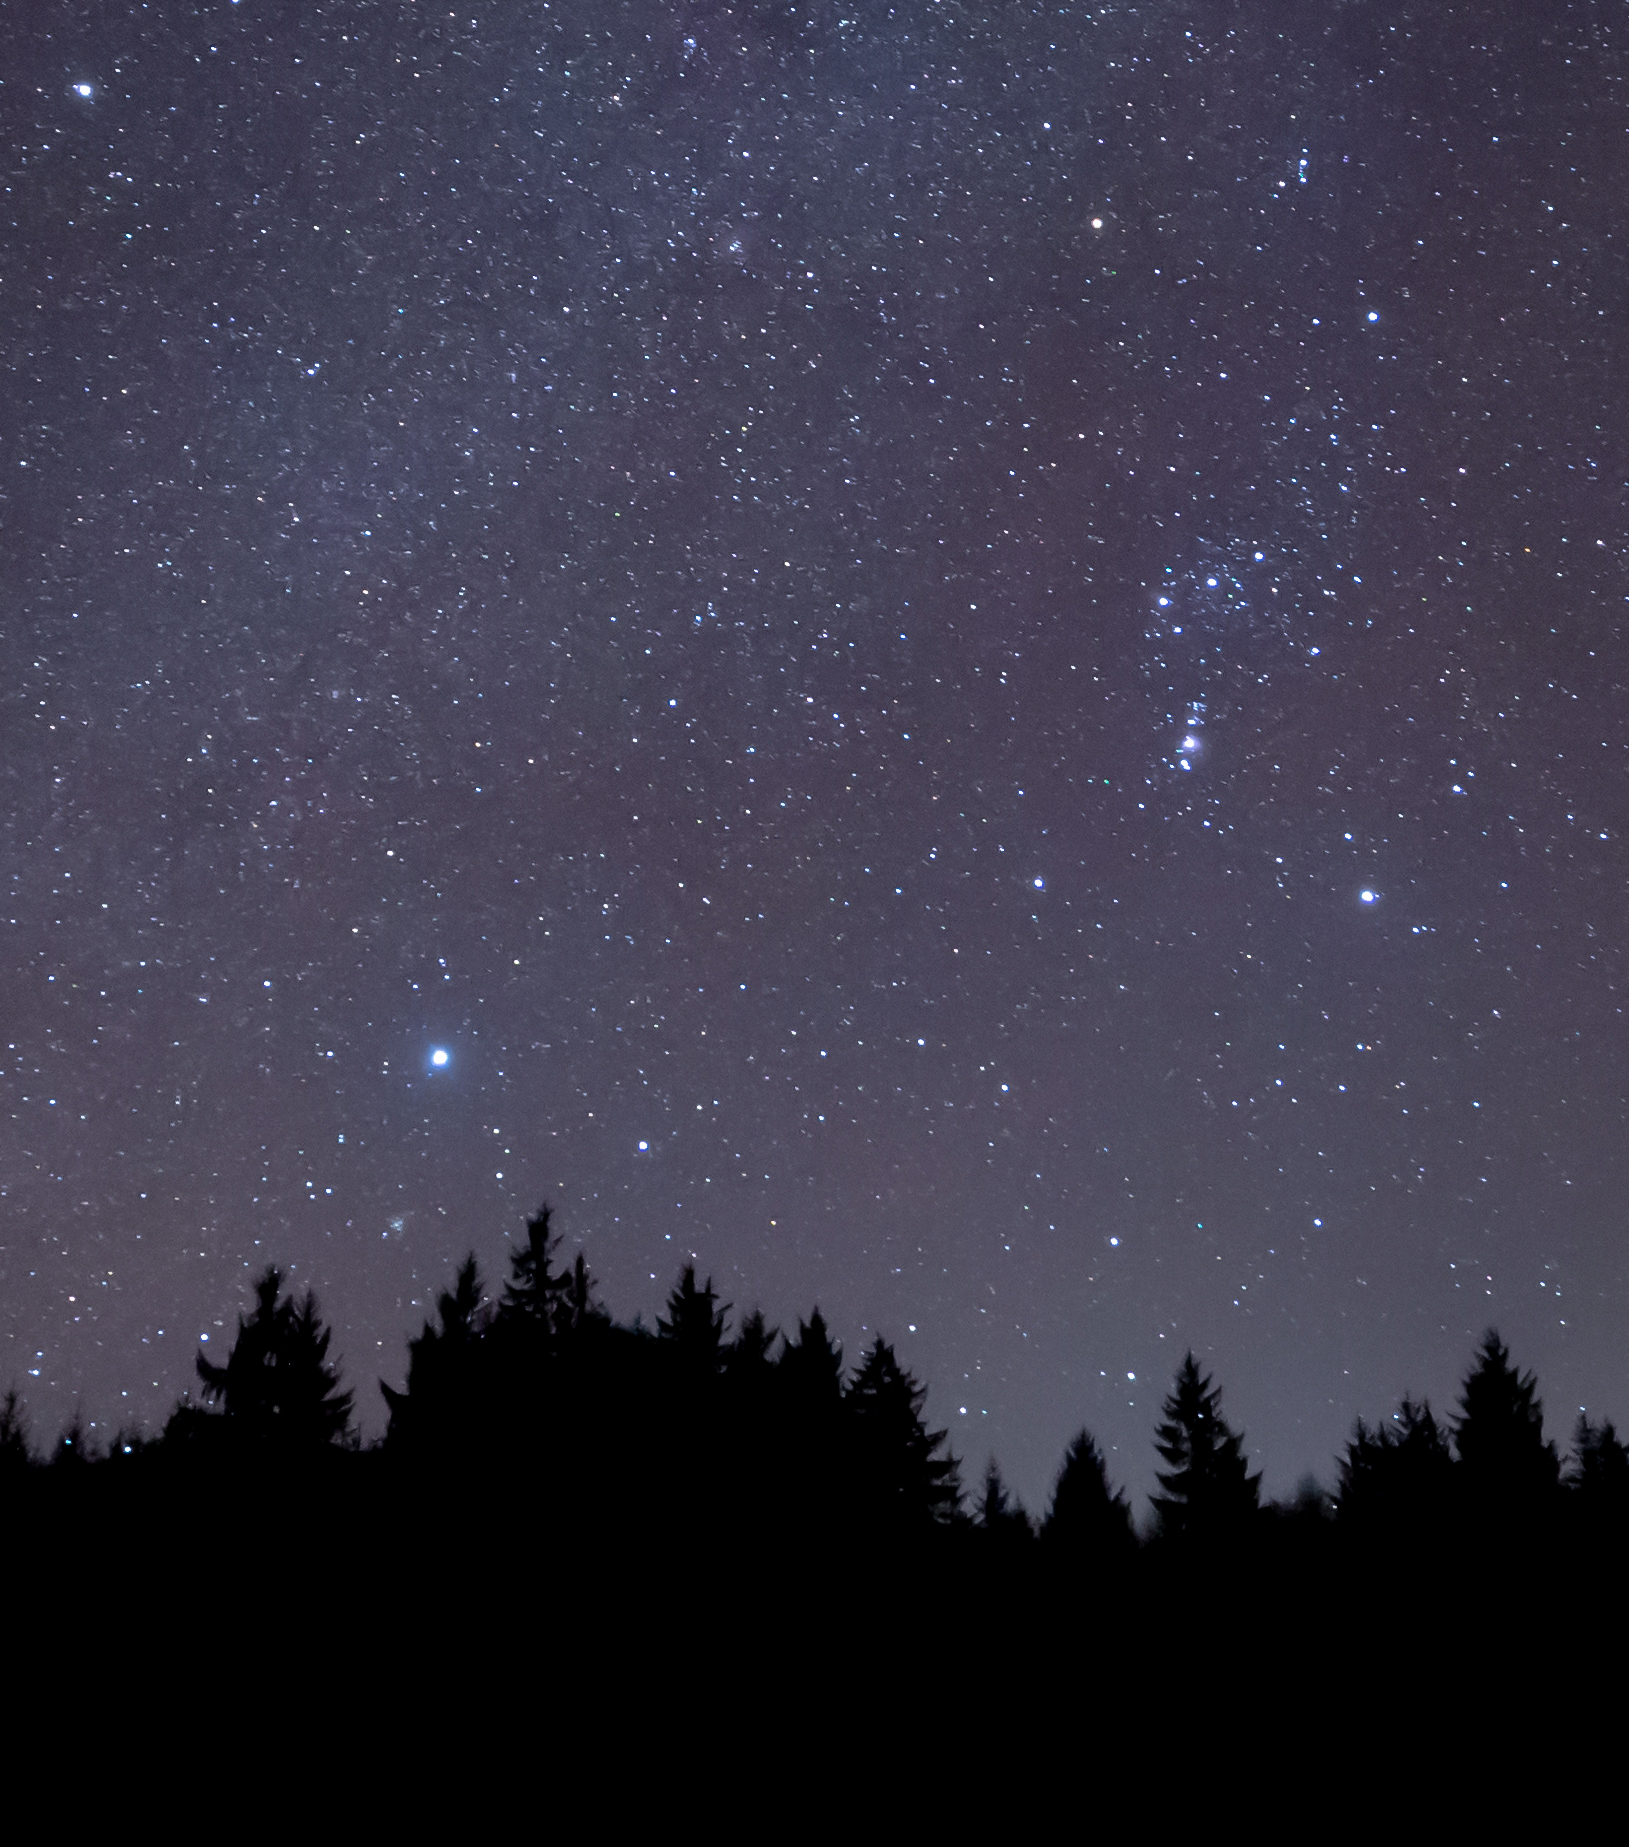 Are Any Stars Visible In The Night Sky Already Dead?